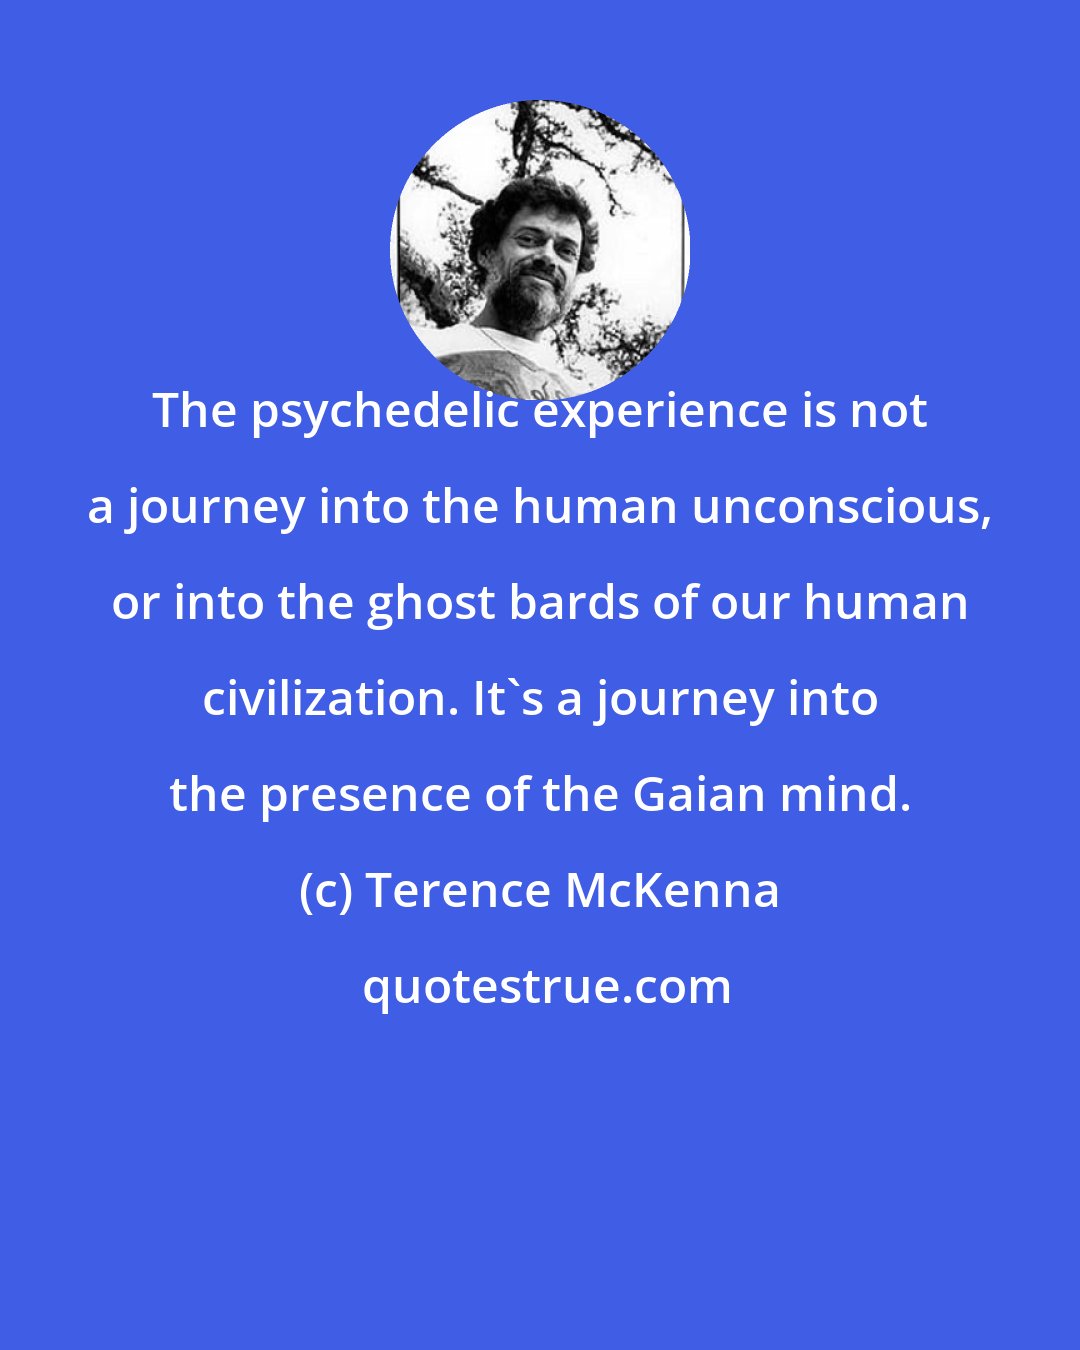 Terence McKenna: The psychedelic experience is not a journey into the human unconscious, or into the ghost bards of our human civilization. It's a journey into the presence of the Gaian mind.